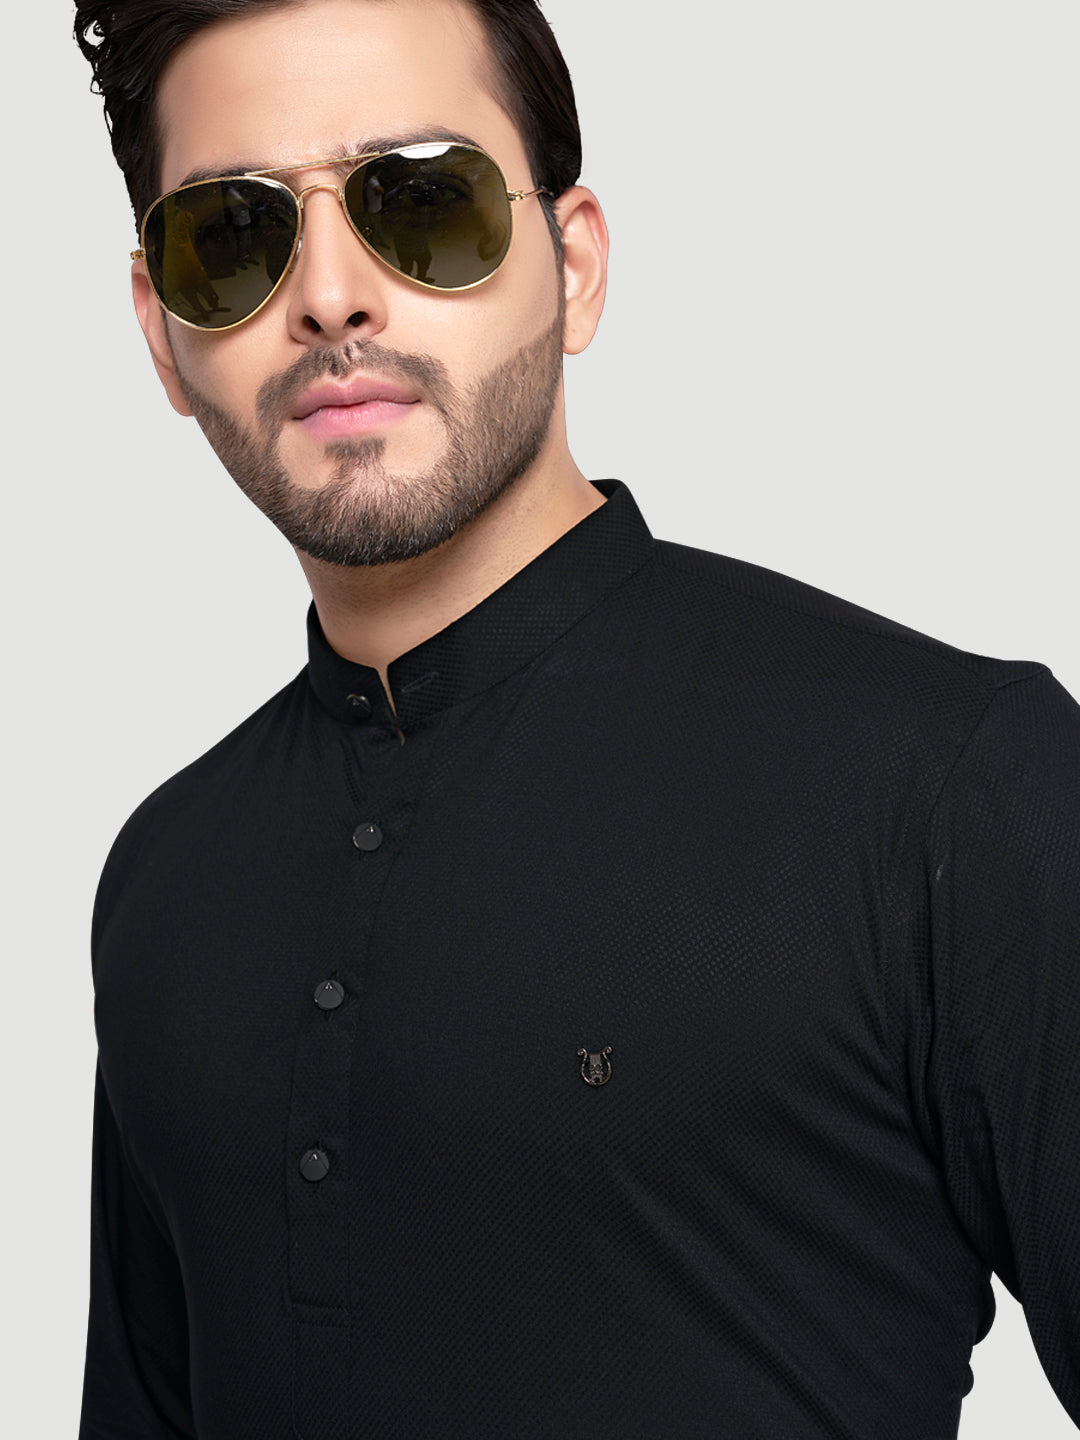 Black and White Men's Designer Shirt with Collar Accessory & Broach-13